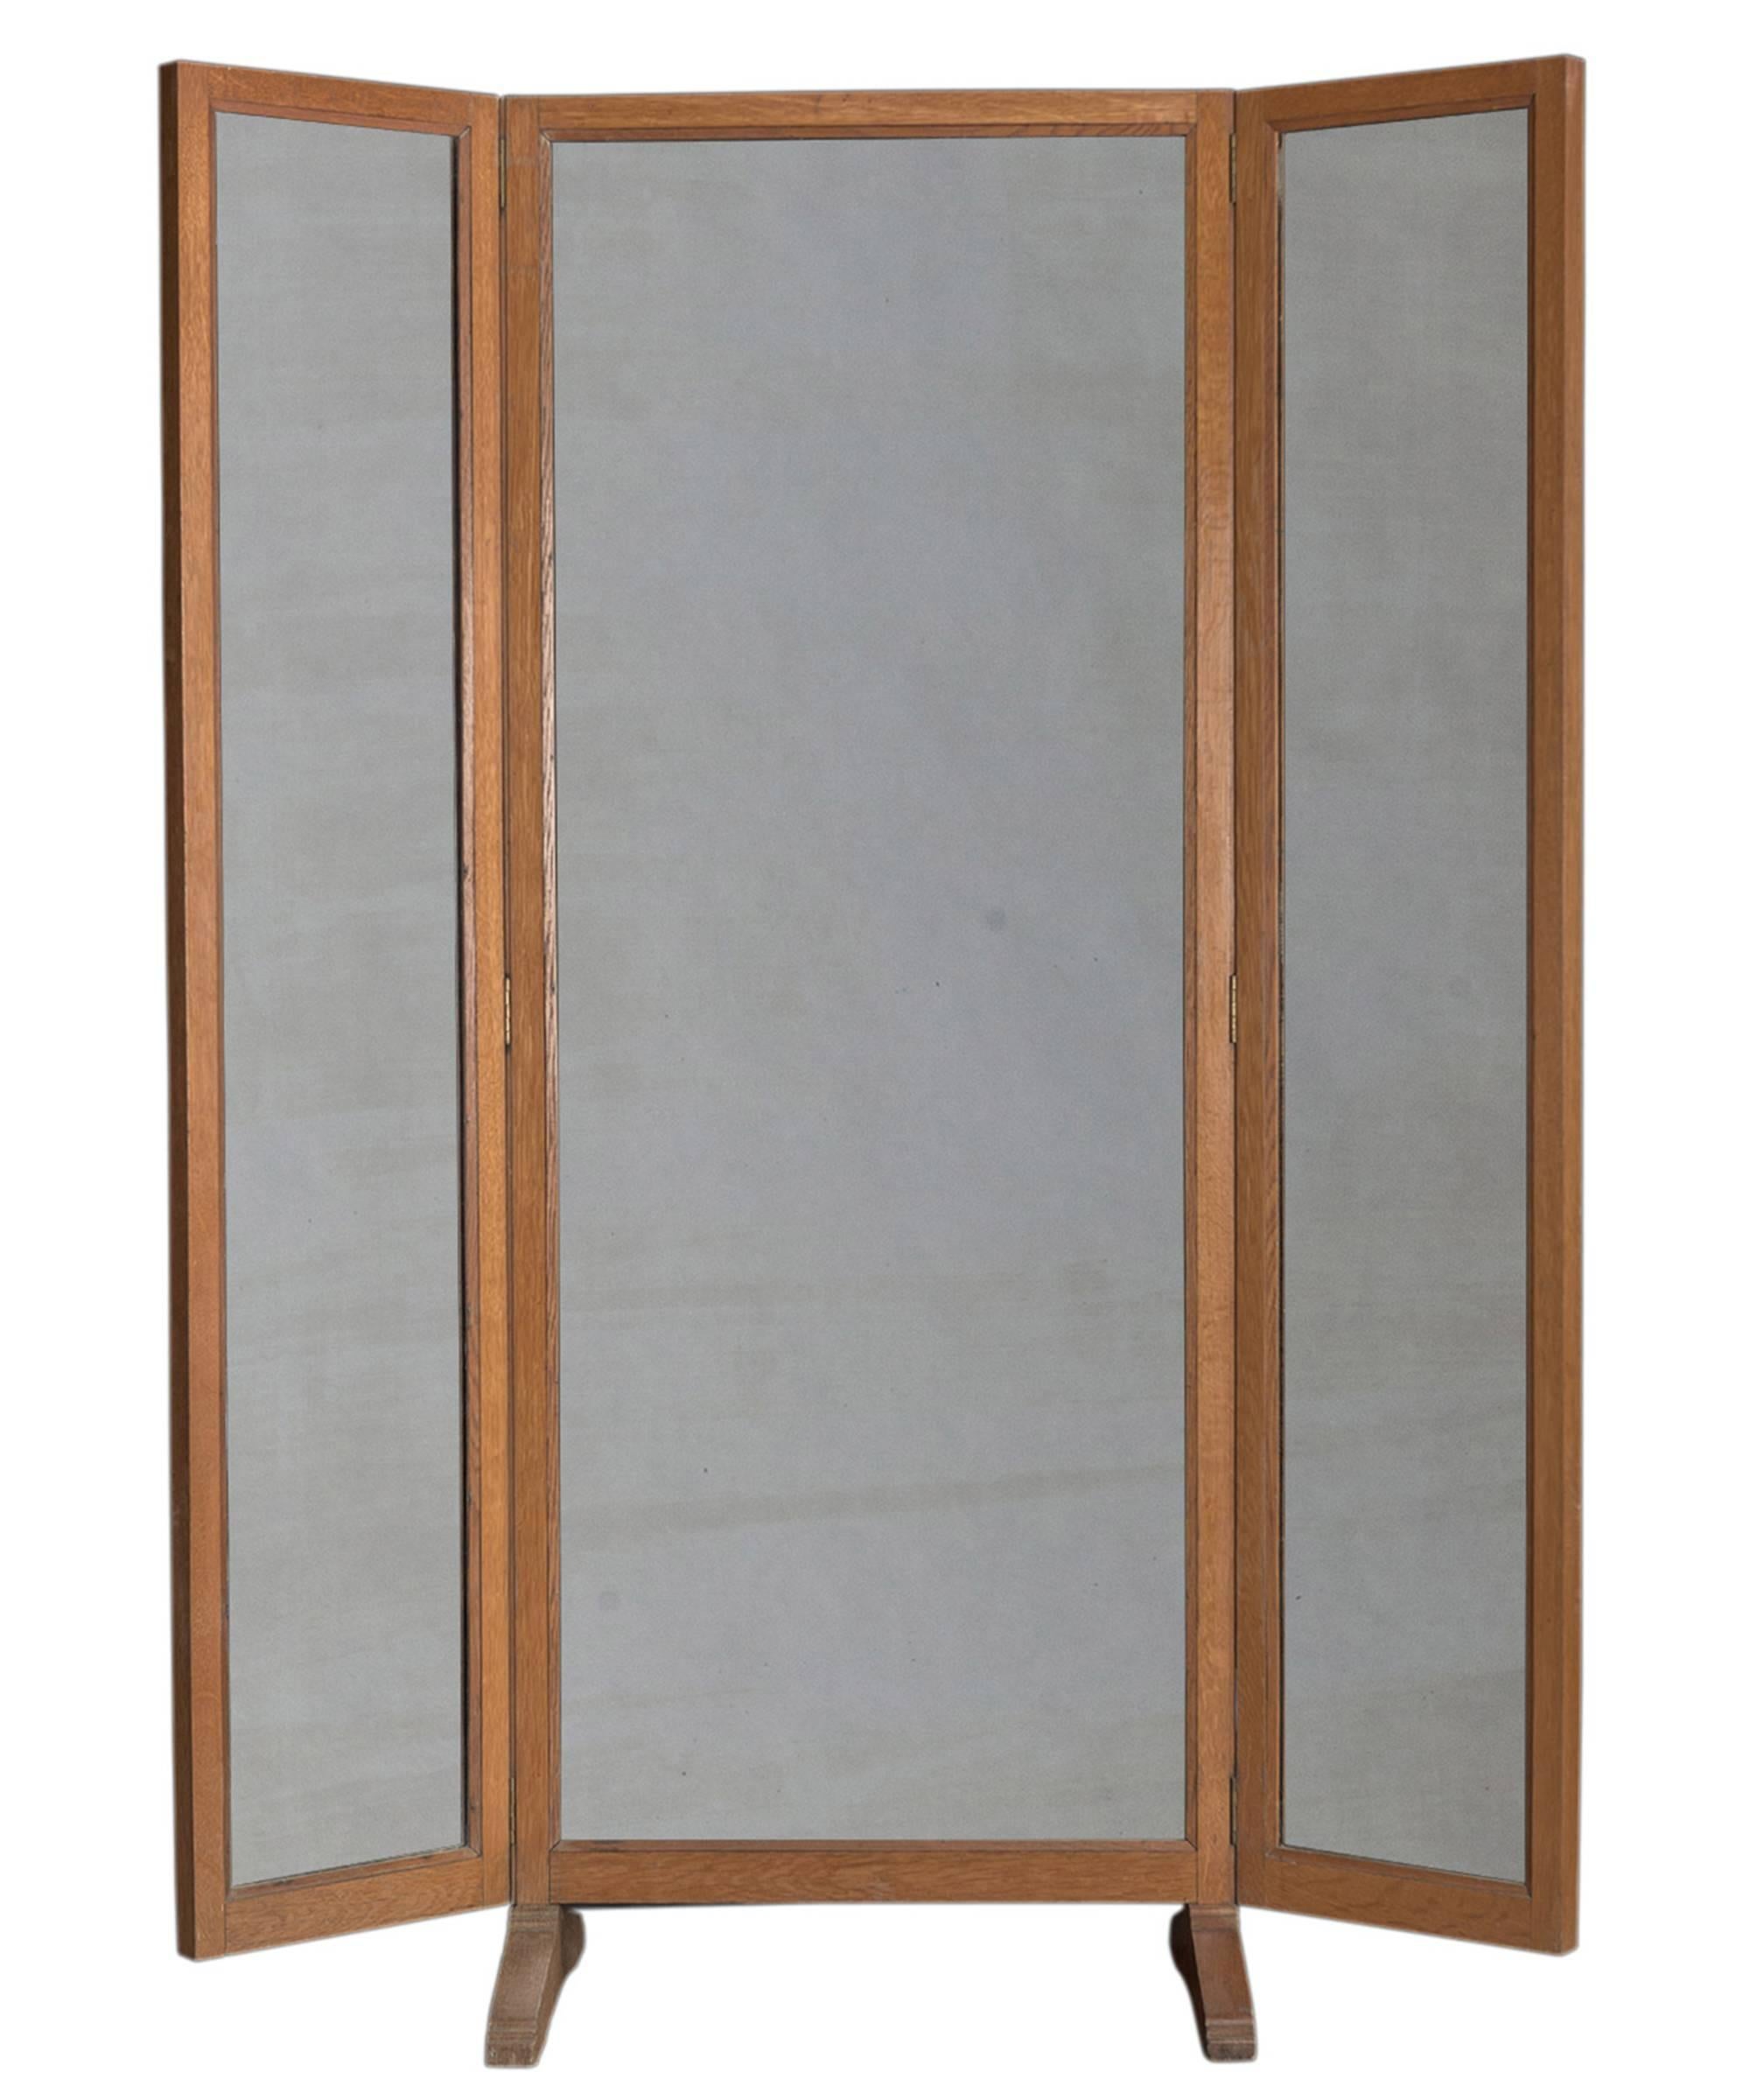 Triple outfitters mirror, England, circa 1920

Freestanding full length central mirror and side mirrors. With oak frame and sledge style feet.